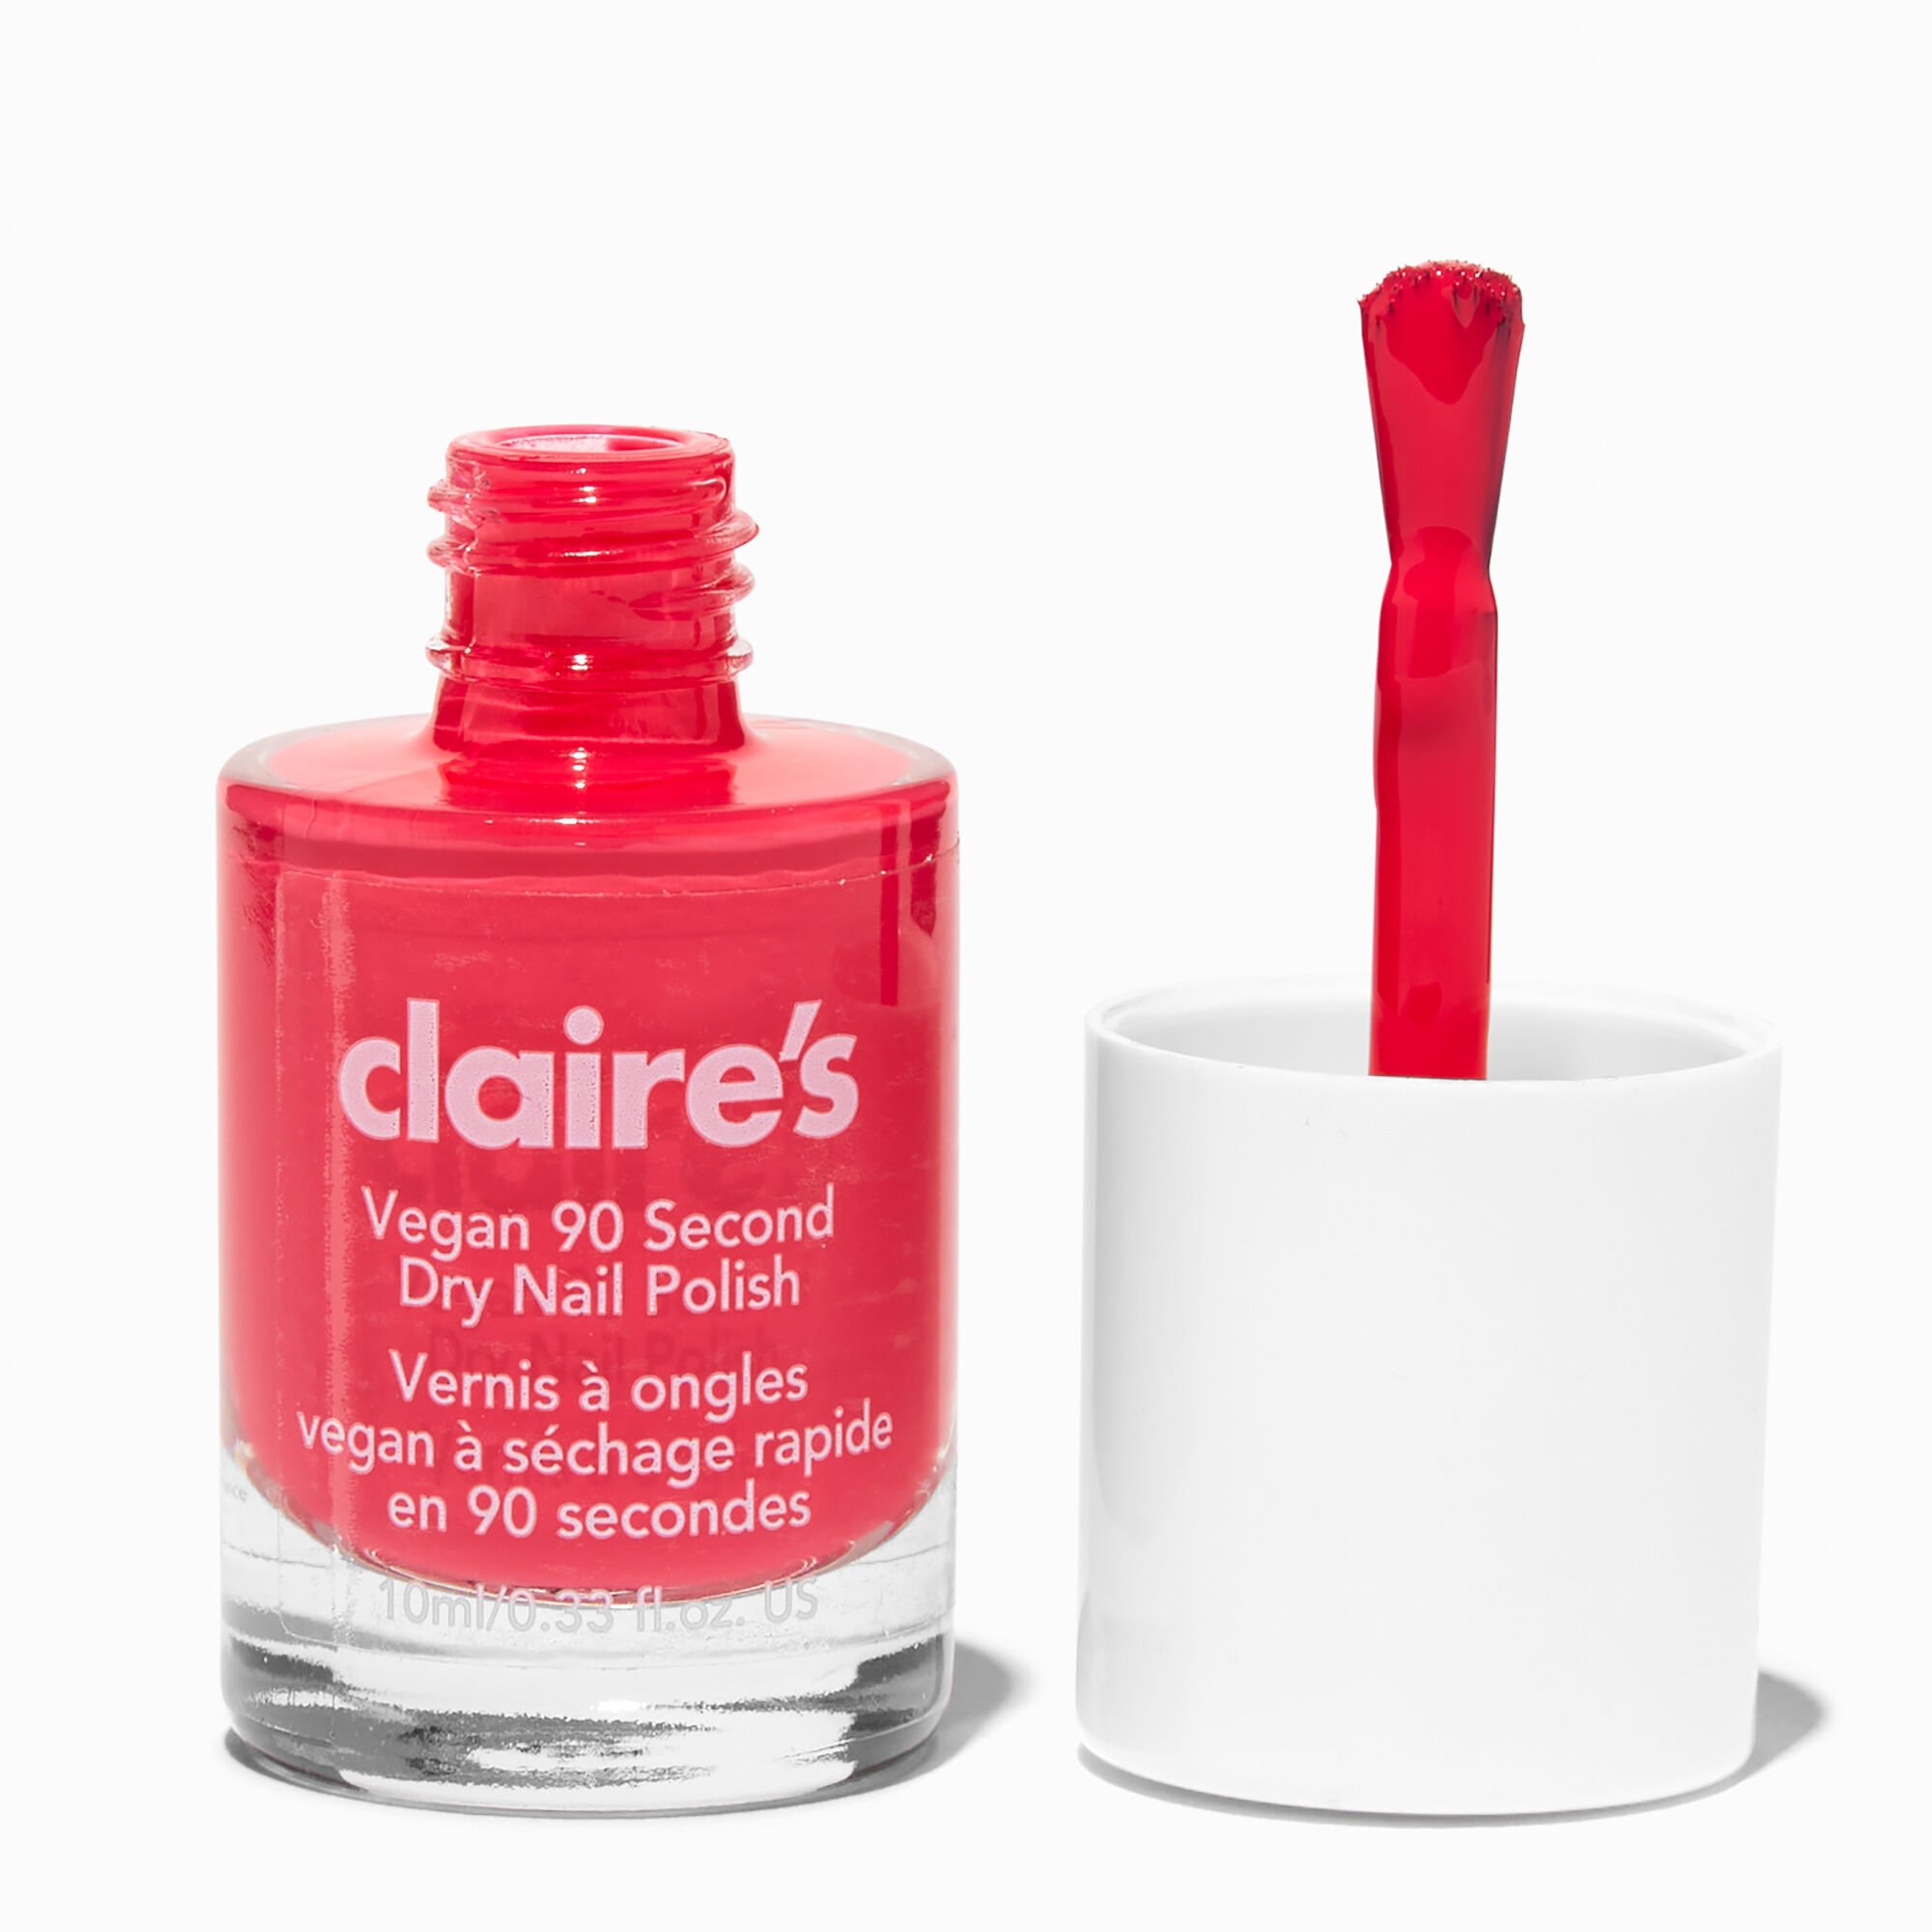 View Claires Vegan 90 Second Dry Nail Polish Perfect Party information